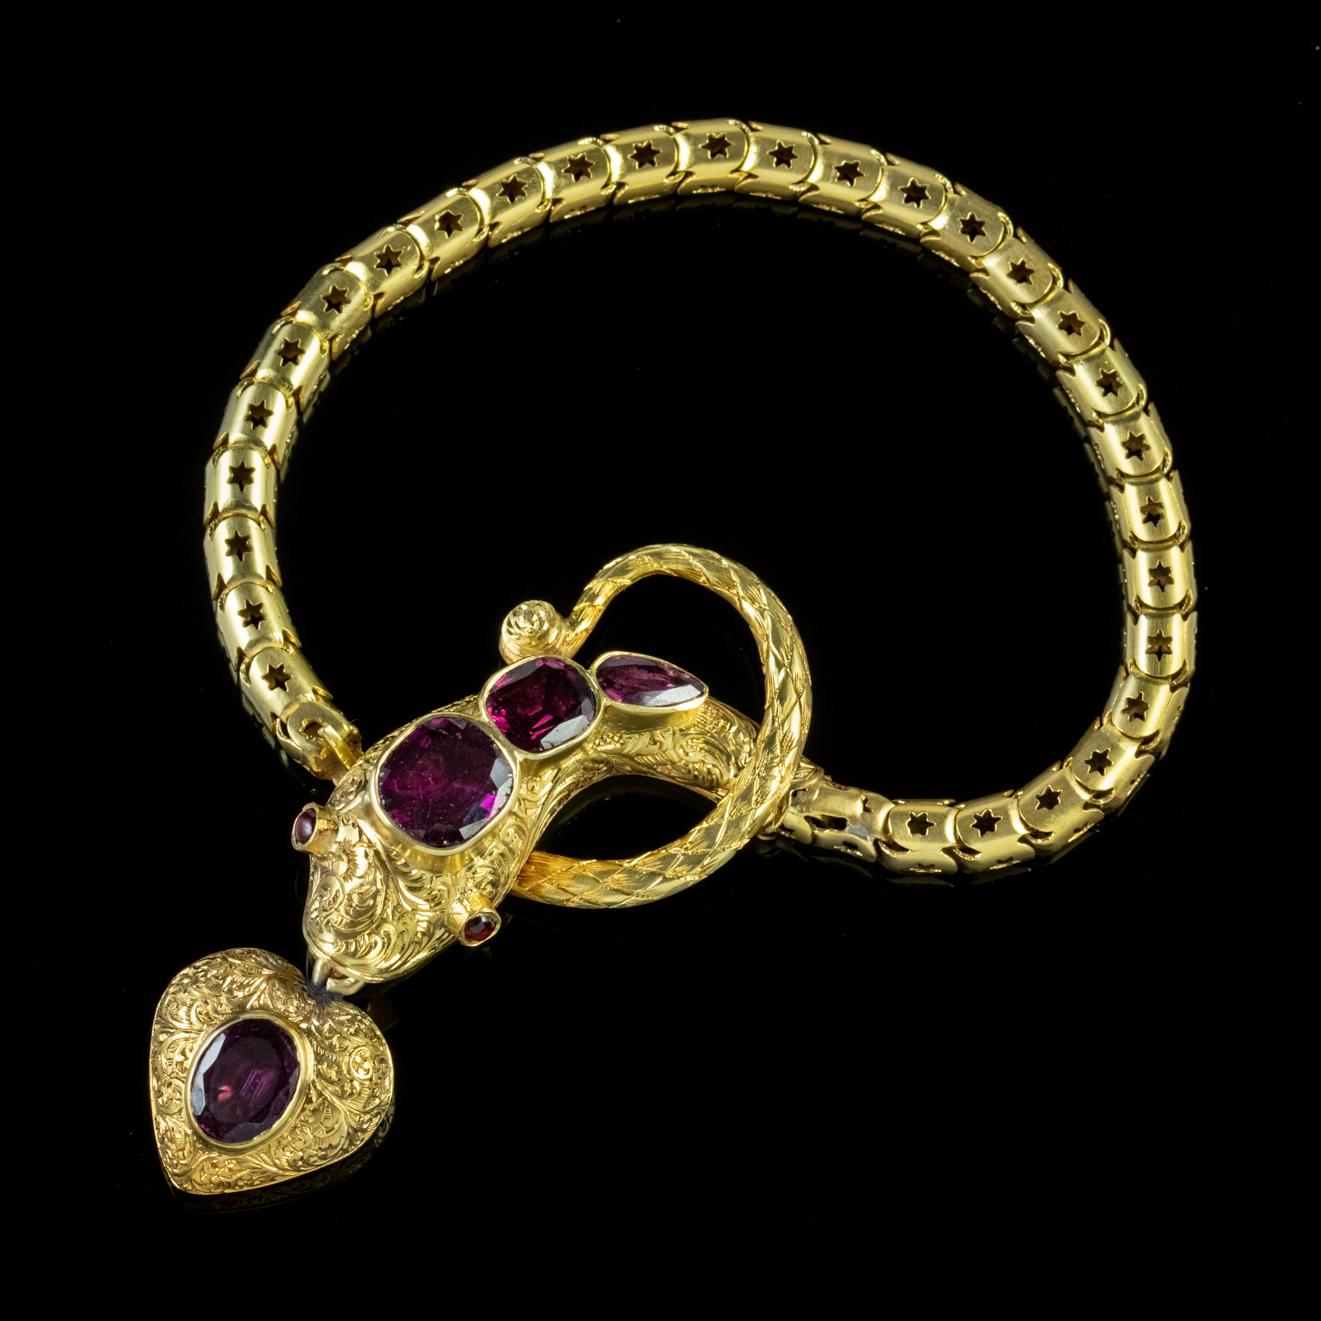 A wonderful solid 18ct Gold antique Georgian serpent bracelet showcasing over 5ct of beautiful deep Almandine Garnets of various shapes and sizes set upon the snake’s head and eyes.

Almandine Garnet’s are known as the stone of Truth and are beloved